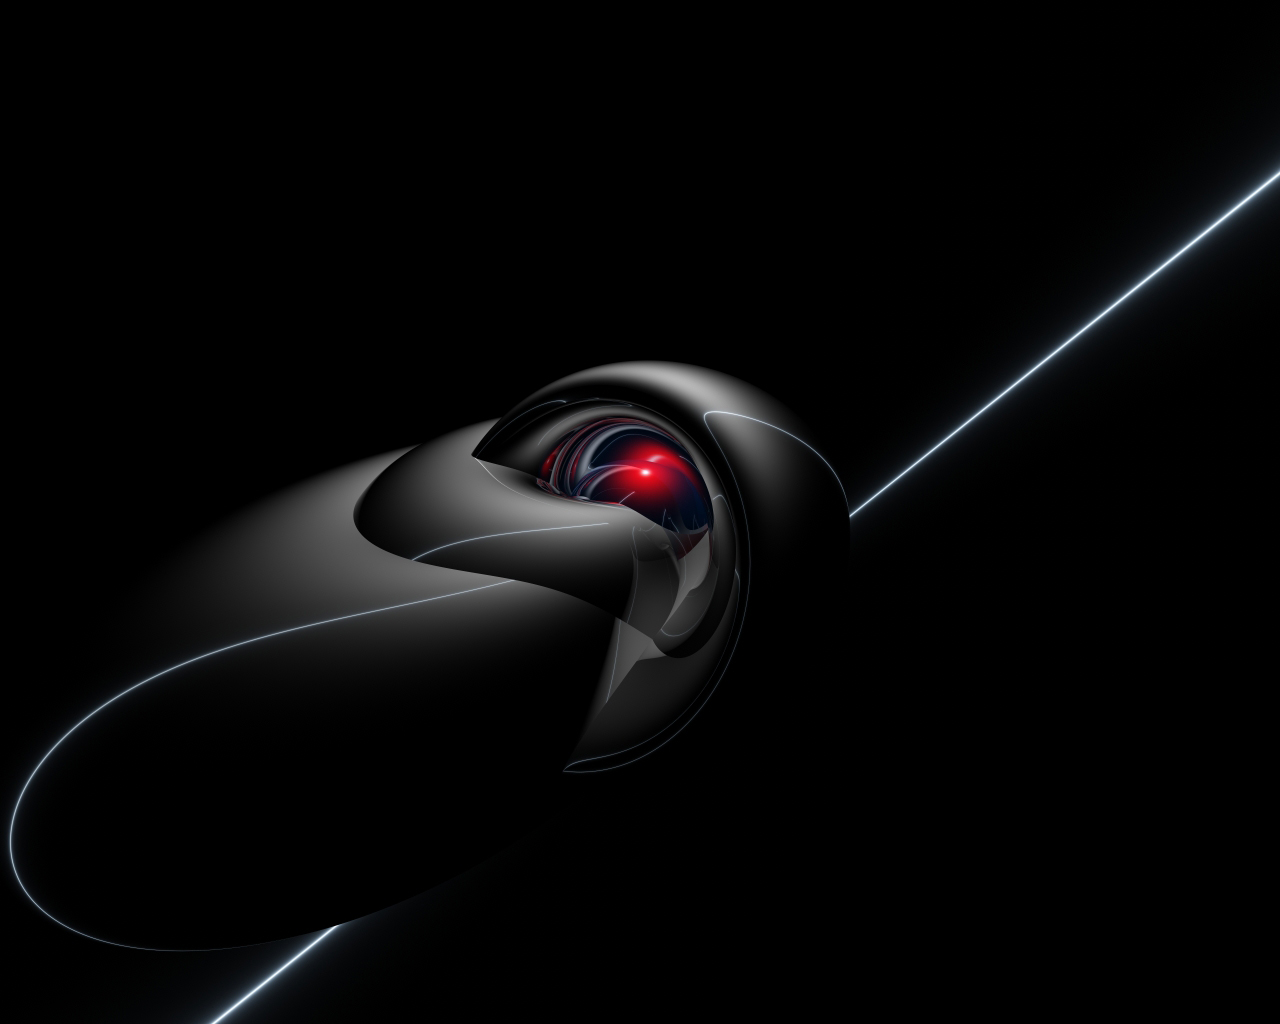 Red Light In Black Machine With Background HD Wallpaper X